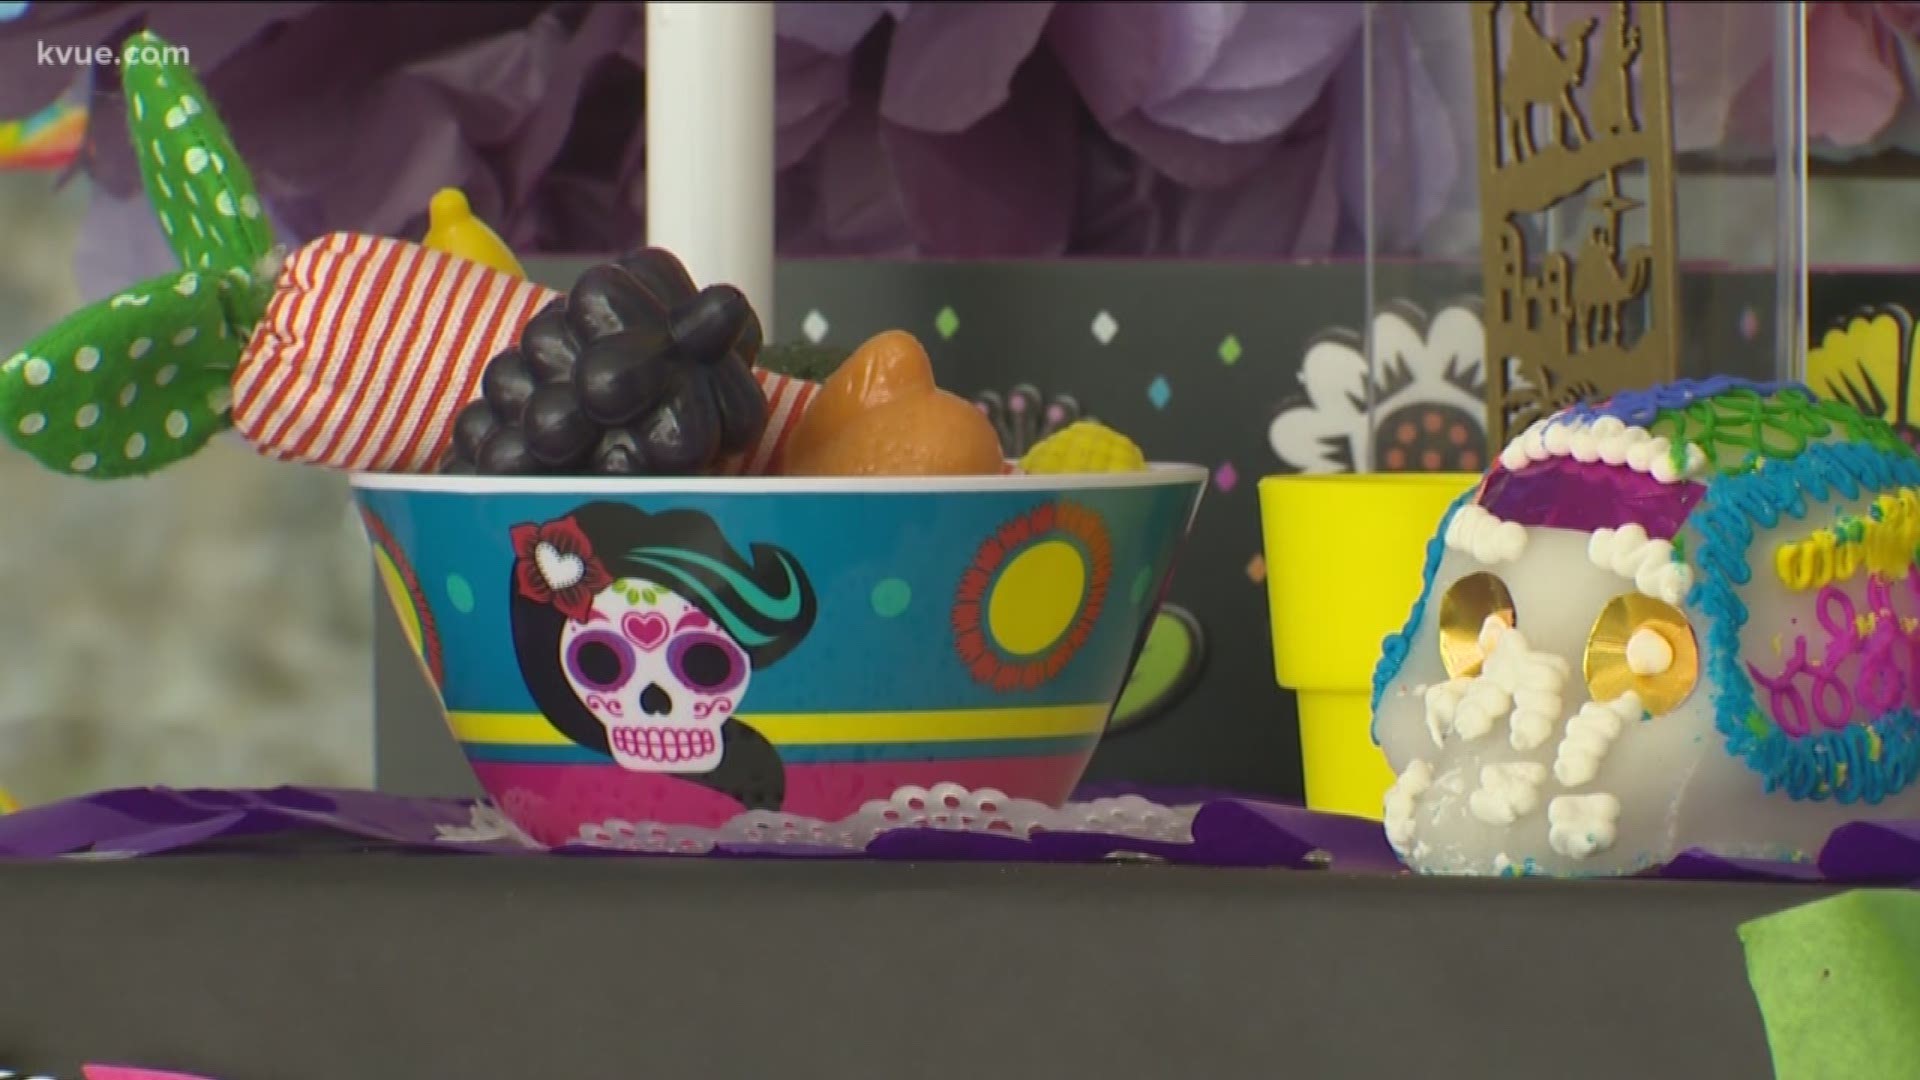 The Mexican American Cultural Center in downtown Austin hosted a celebration for Día de Los Muertos, or the Day of the Dead.